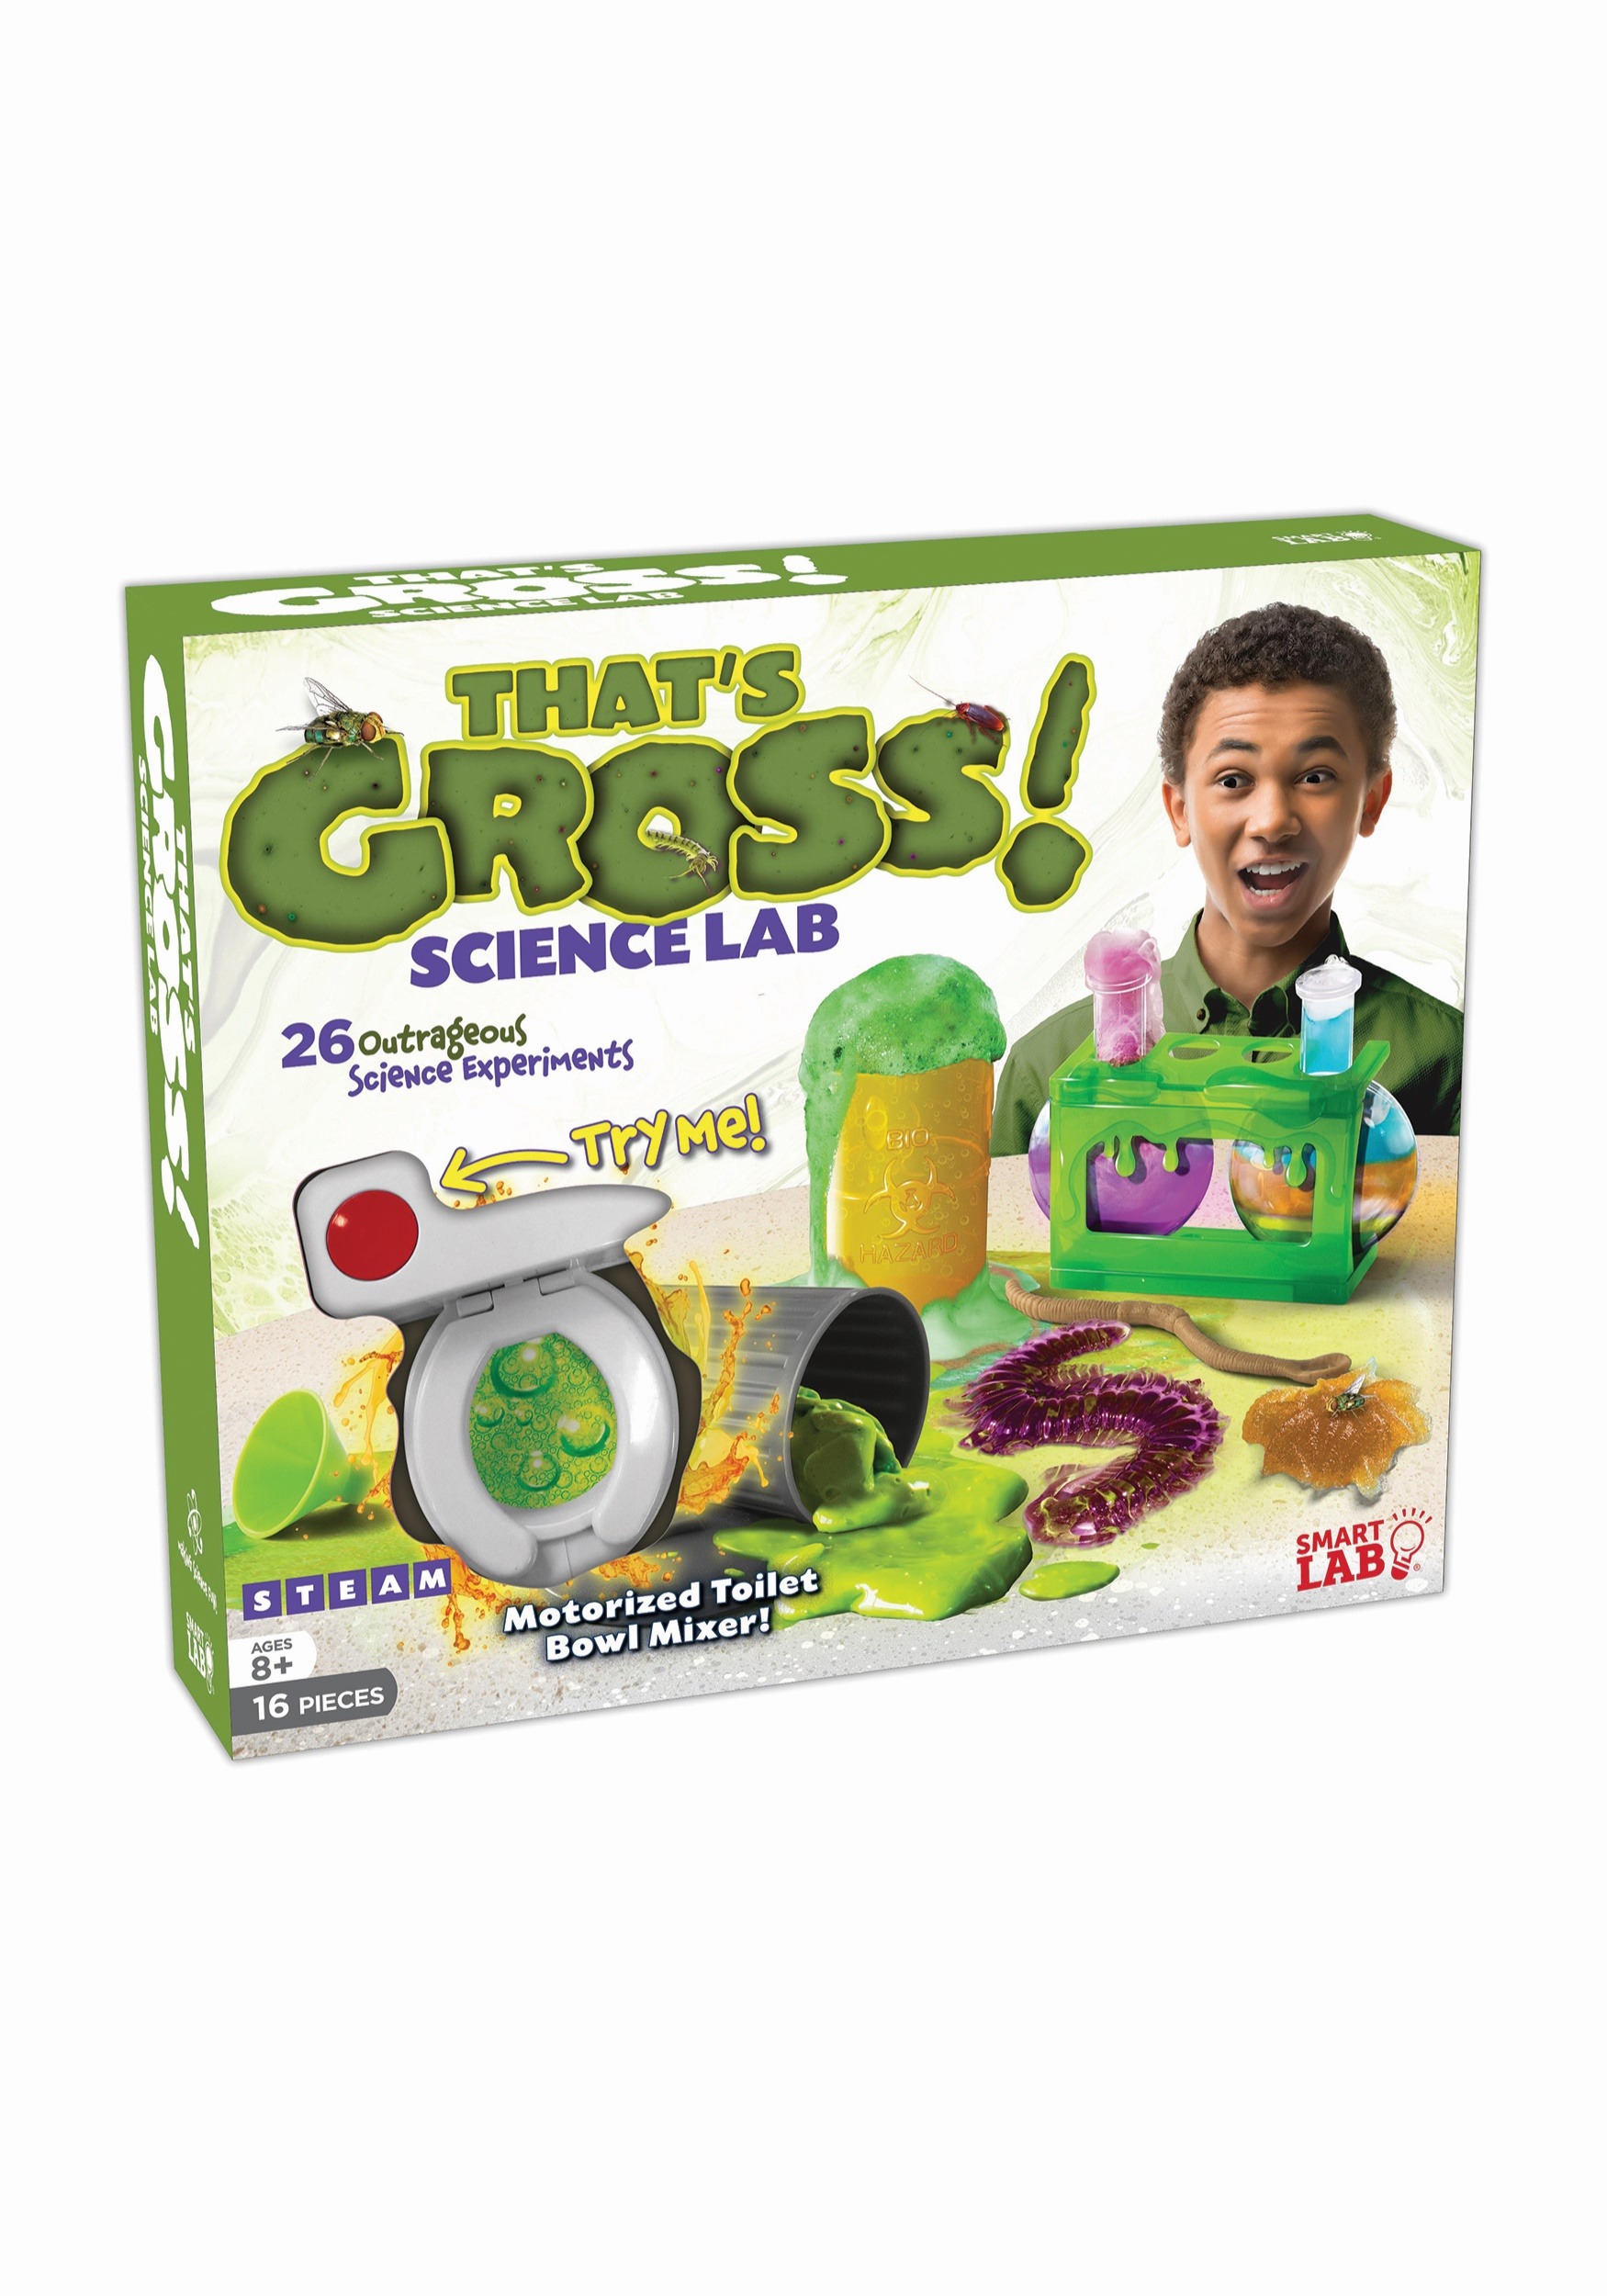 Thats Gross Science Lab from SmartLab Toys